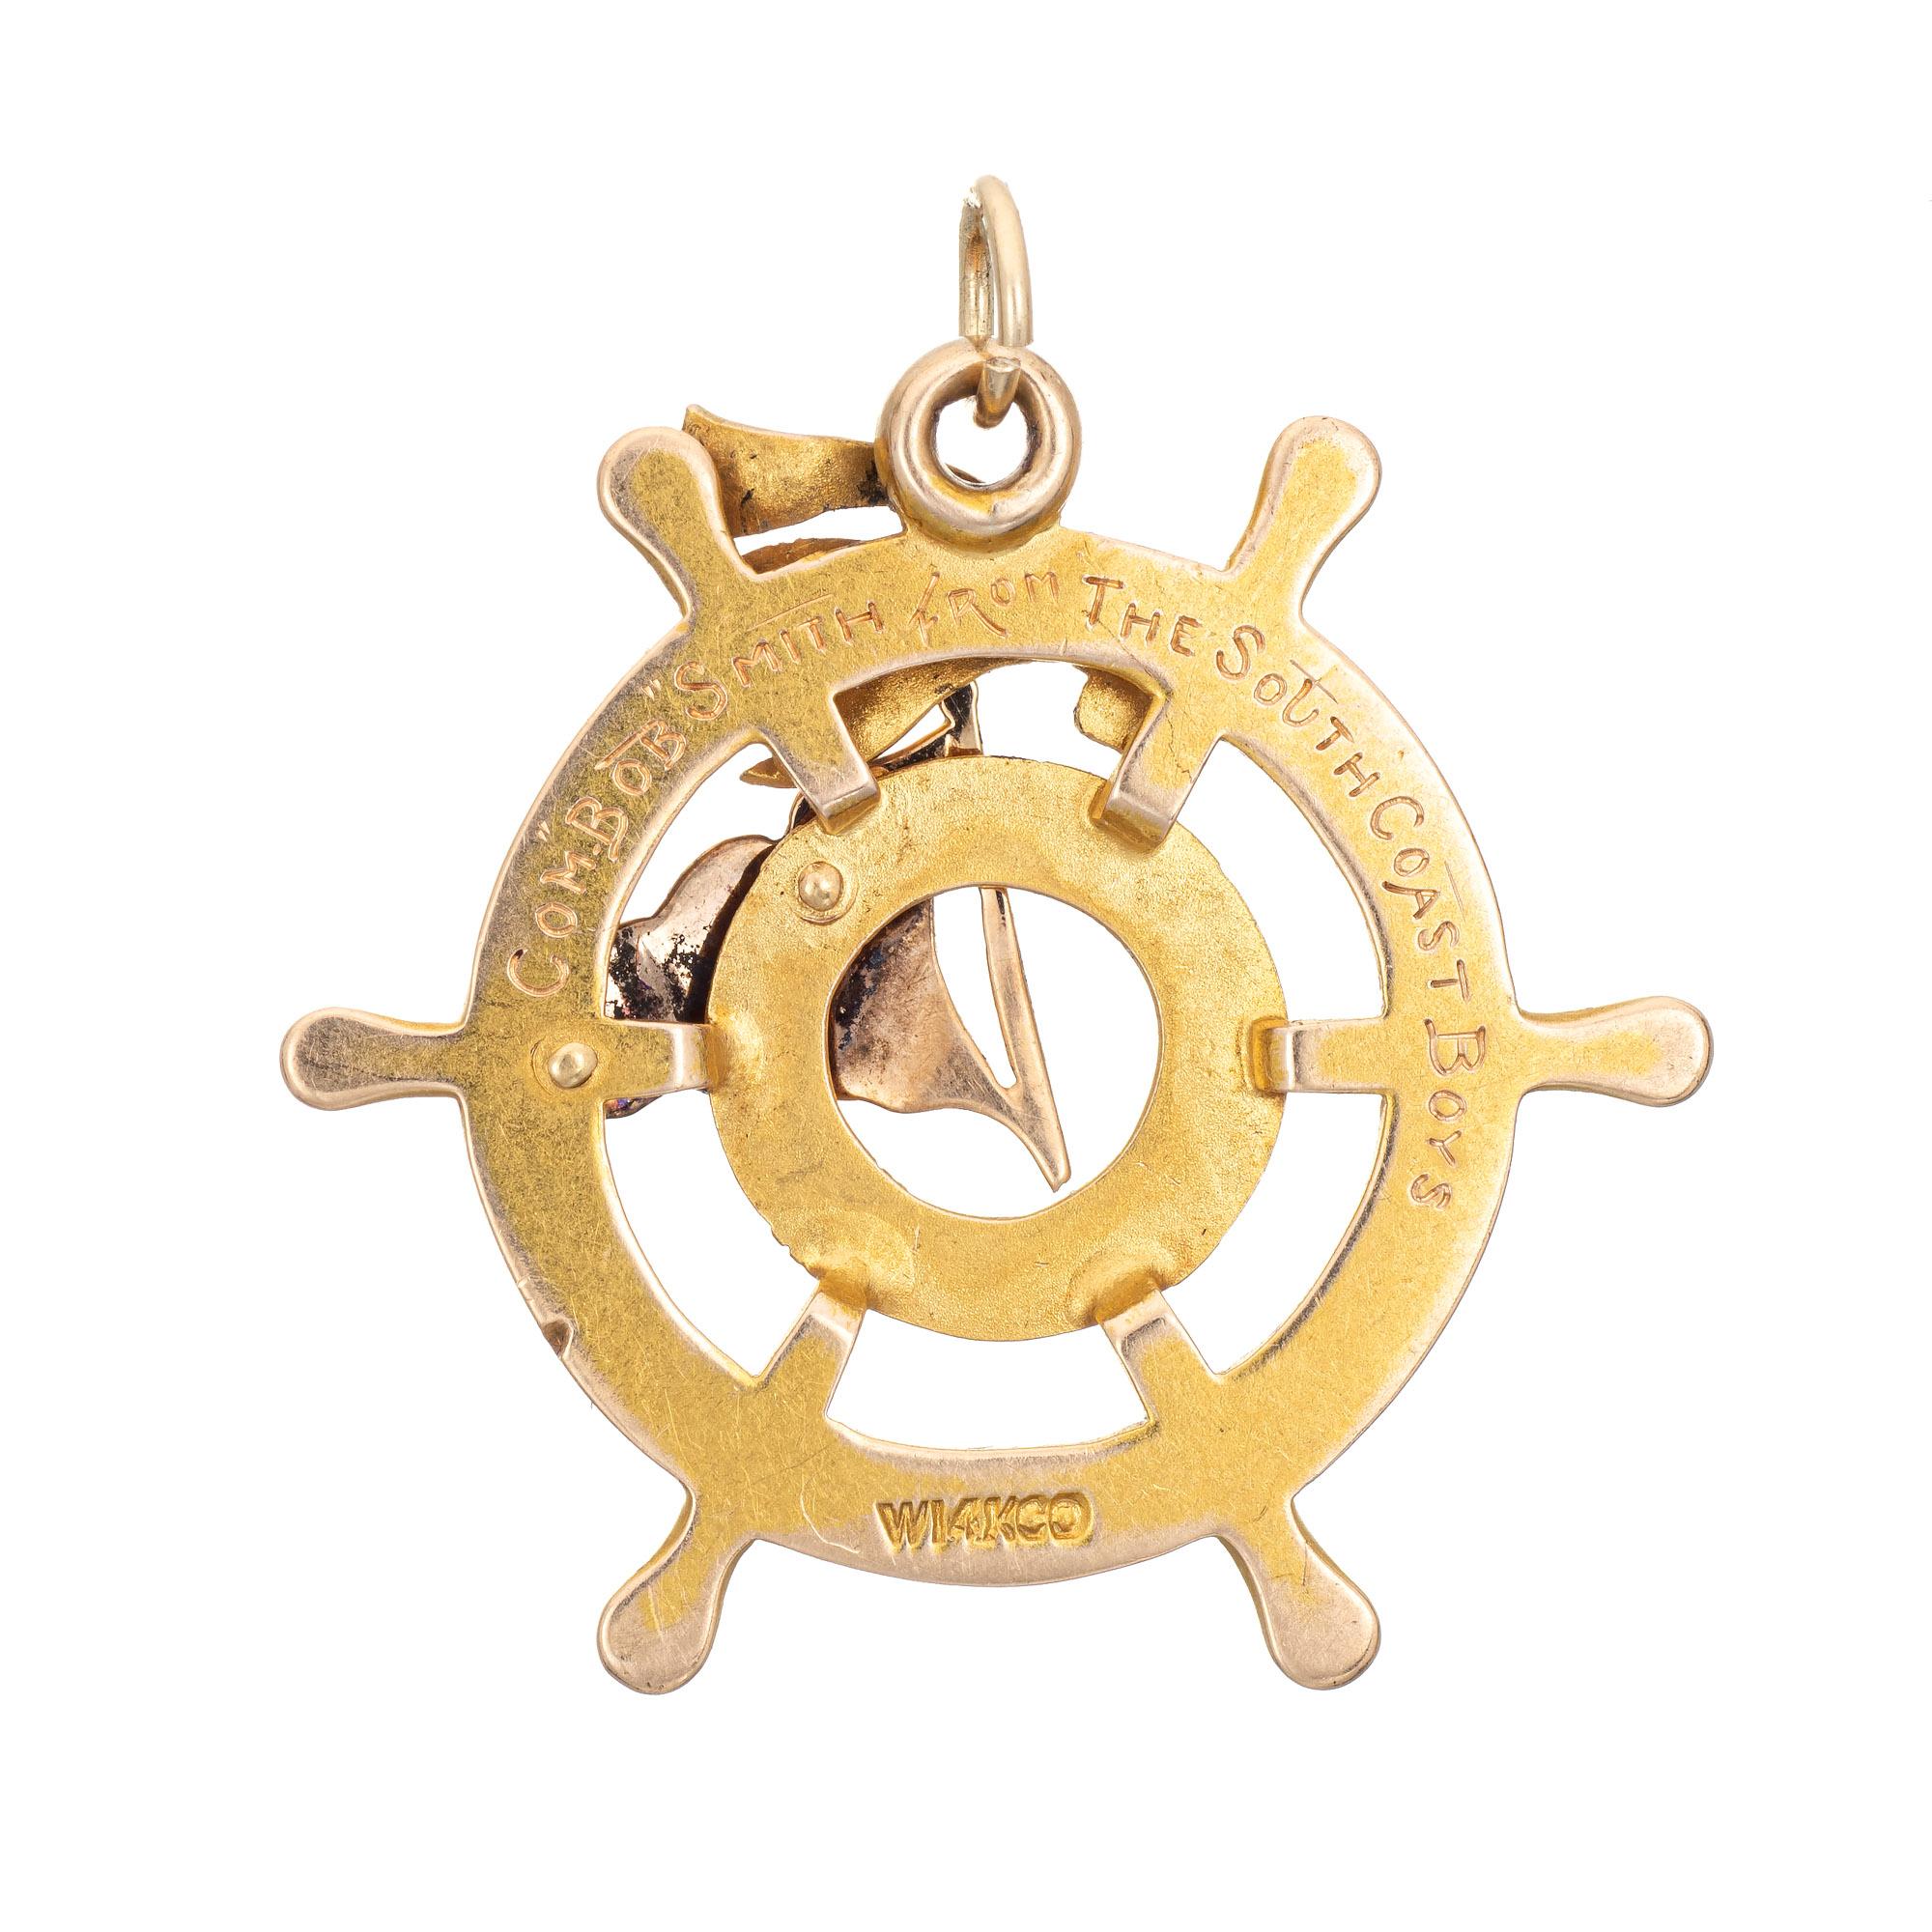 Finely detailed antique Edwardian era Ships Wheel medallion crafted in 14k yellow gold (circa 1910).  

The Ships Wheel features an enameled Burgee nautical flag for the South Coast Yacht Club that later became the Los Angeles (LA) Yacht Club. The